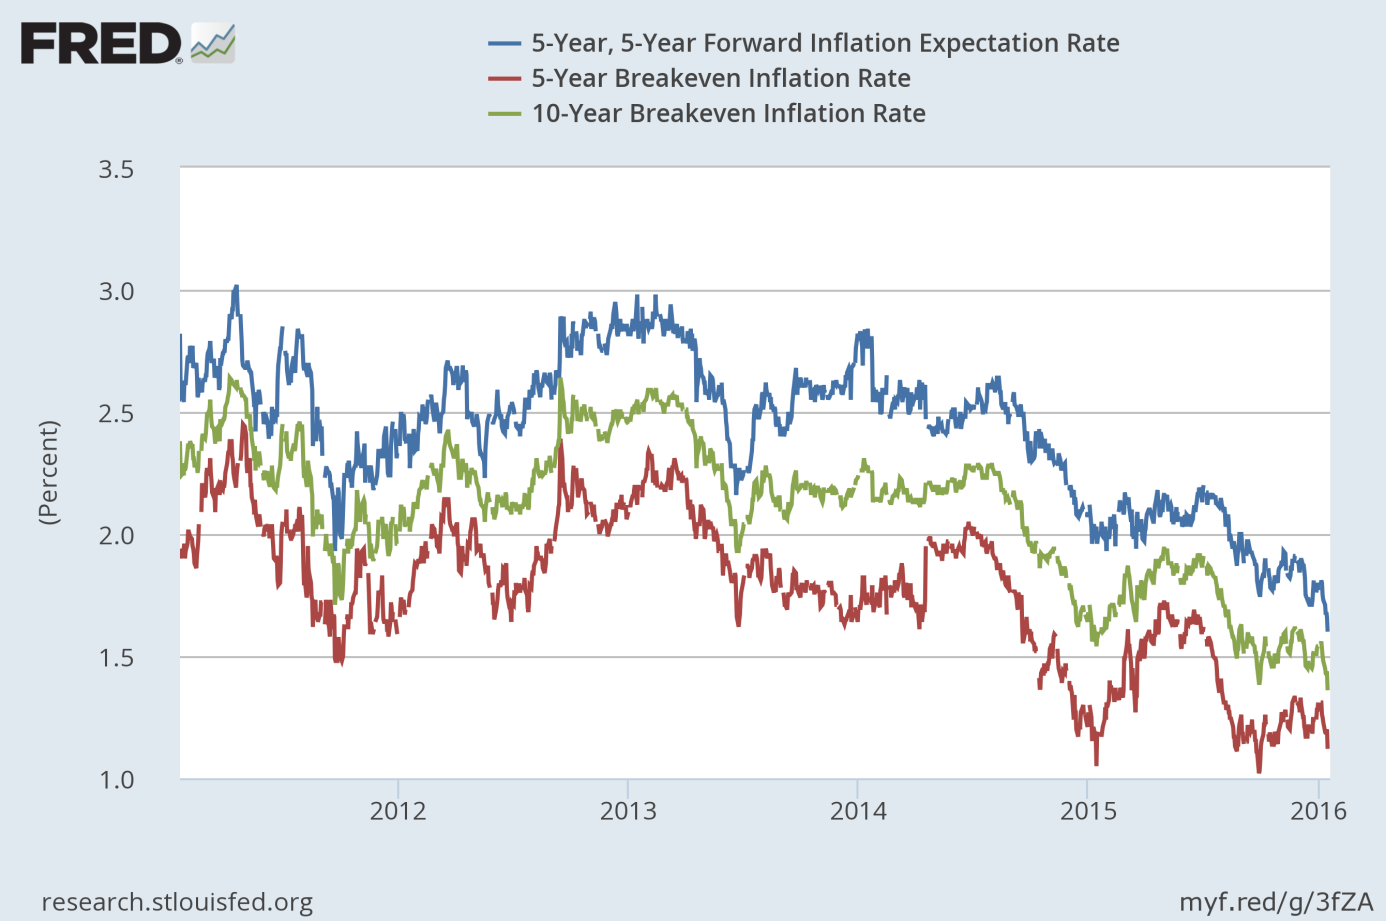 Long-term inflation expectations from 2011 to 2016.